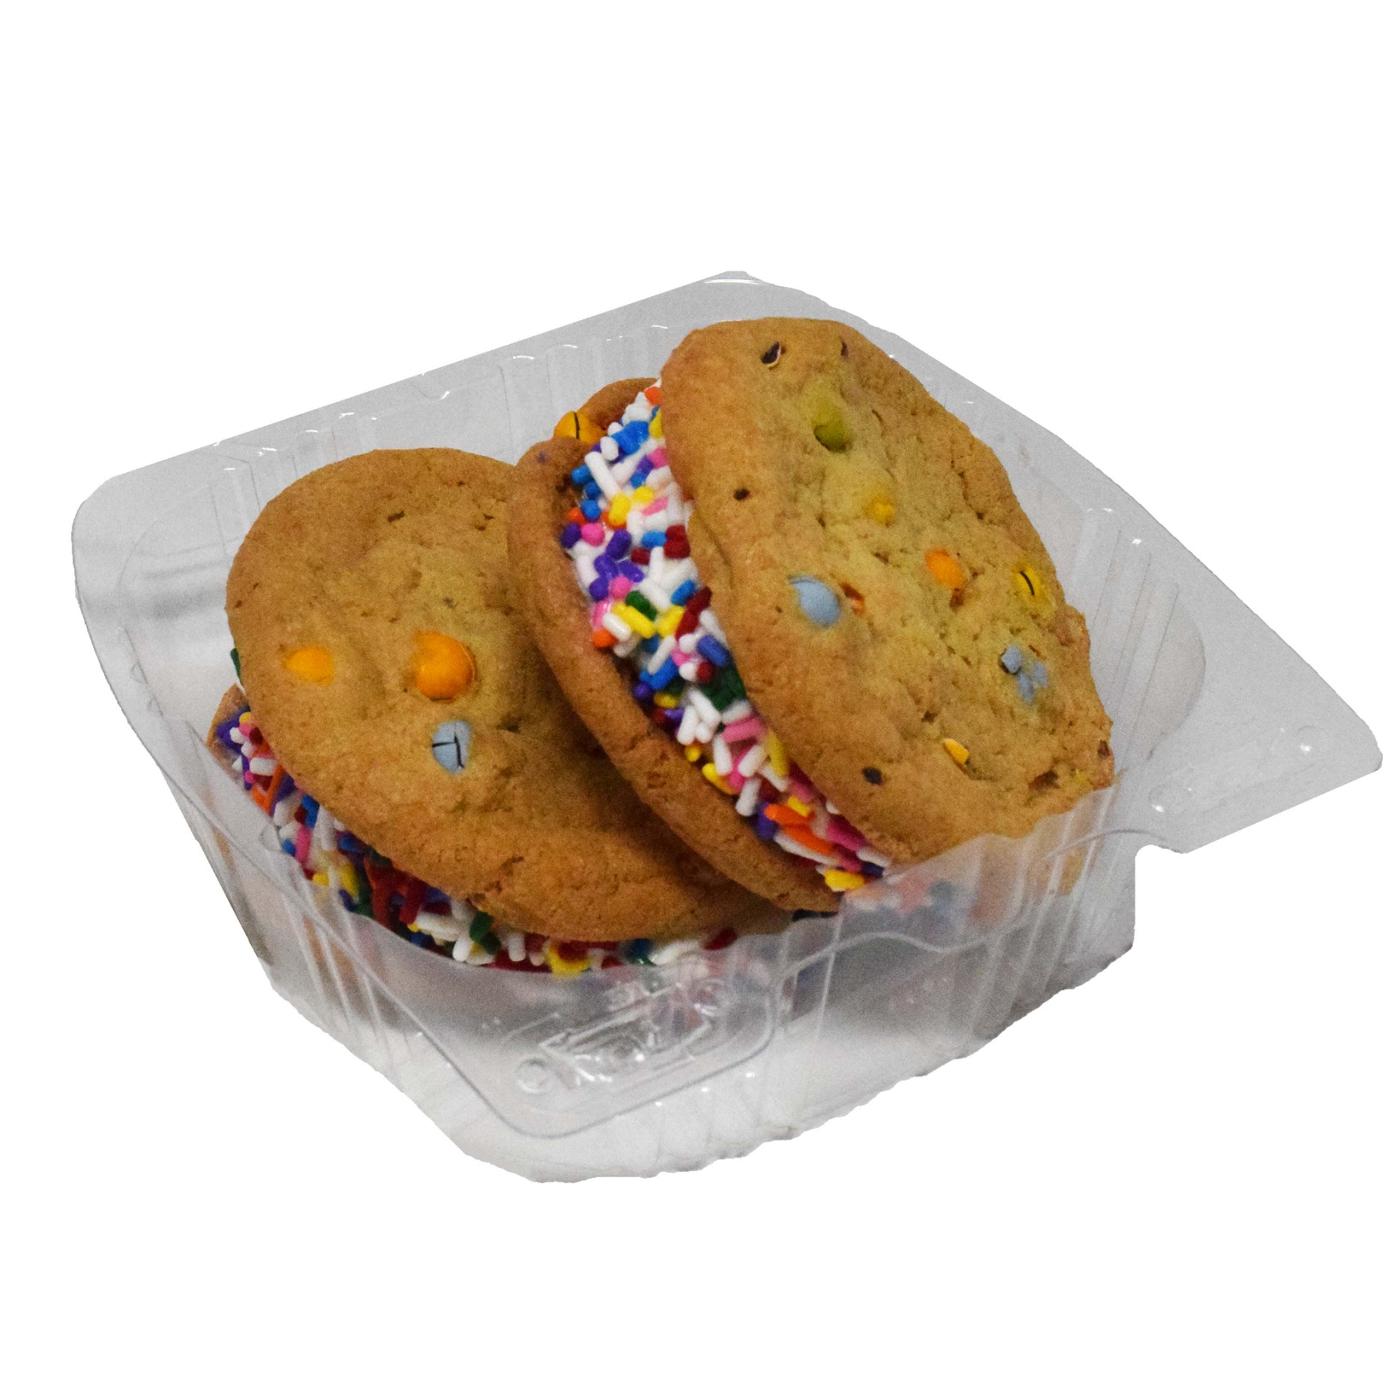 H-E-B Candy Cookie with Vanilla Ice Cream and Sprinkles Sandwich; image 1 of 2